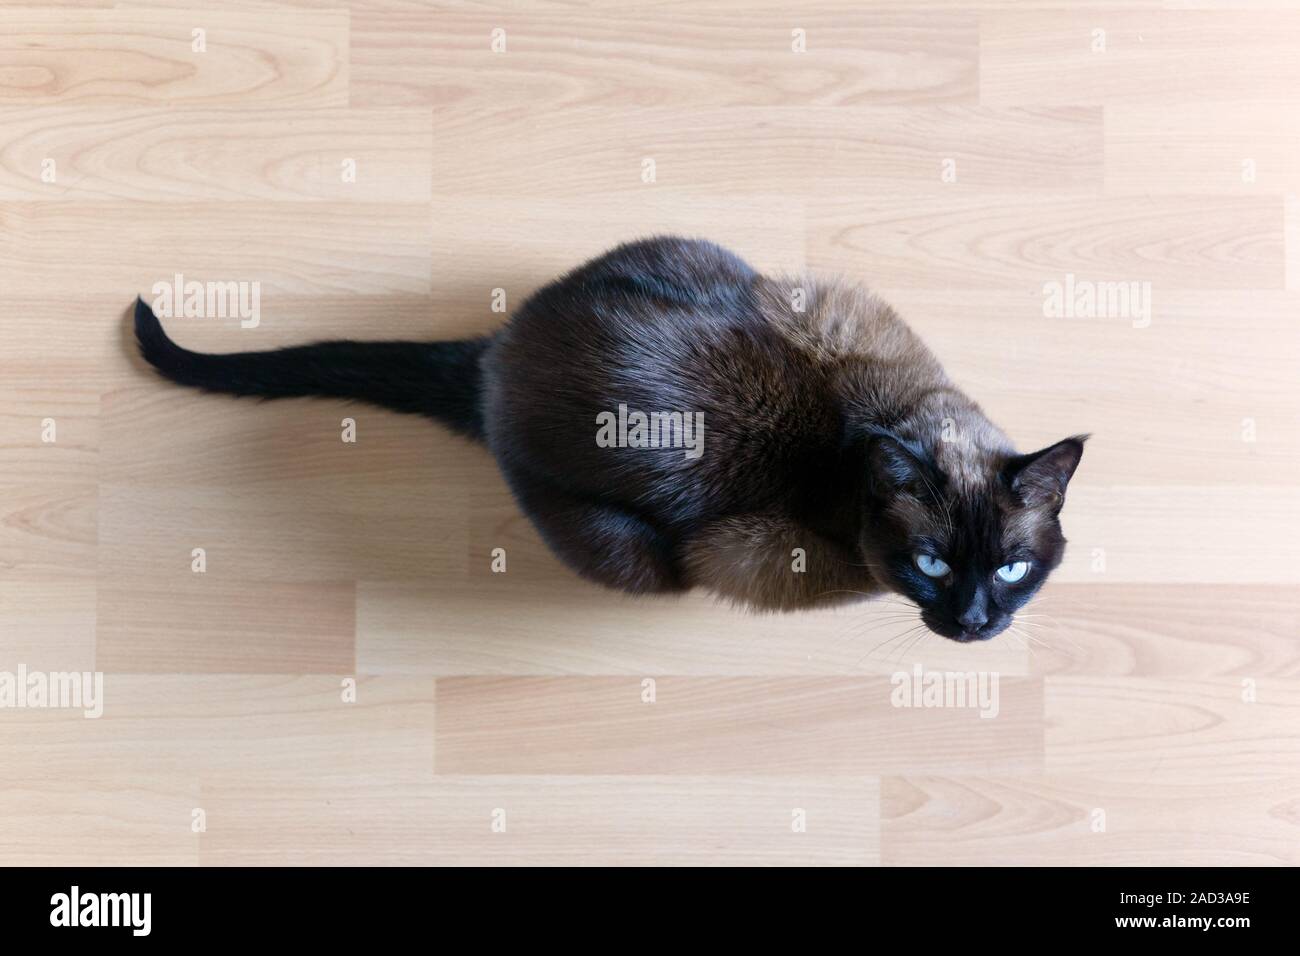 overhead view of siamese cat sitting on laminate floor looking up with blue eyes Stock Photo